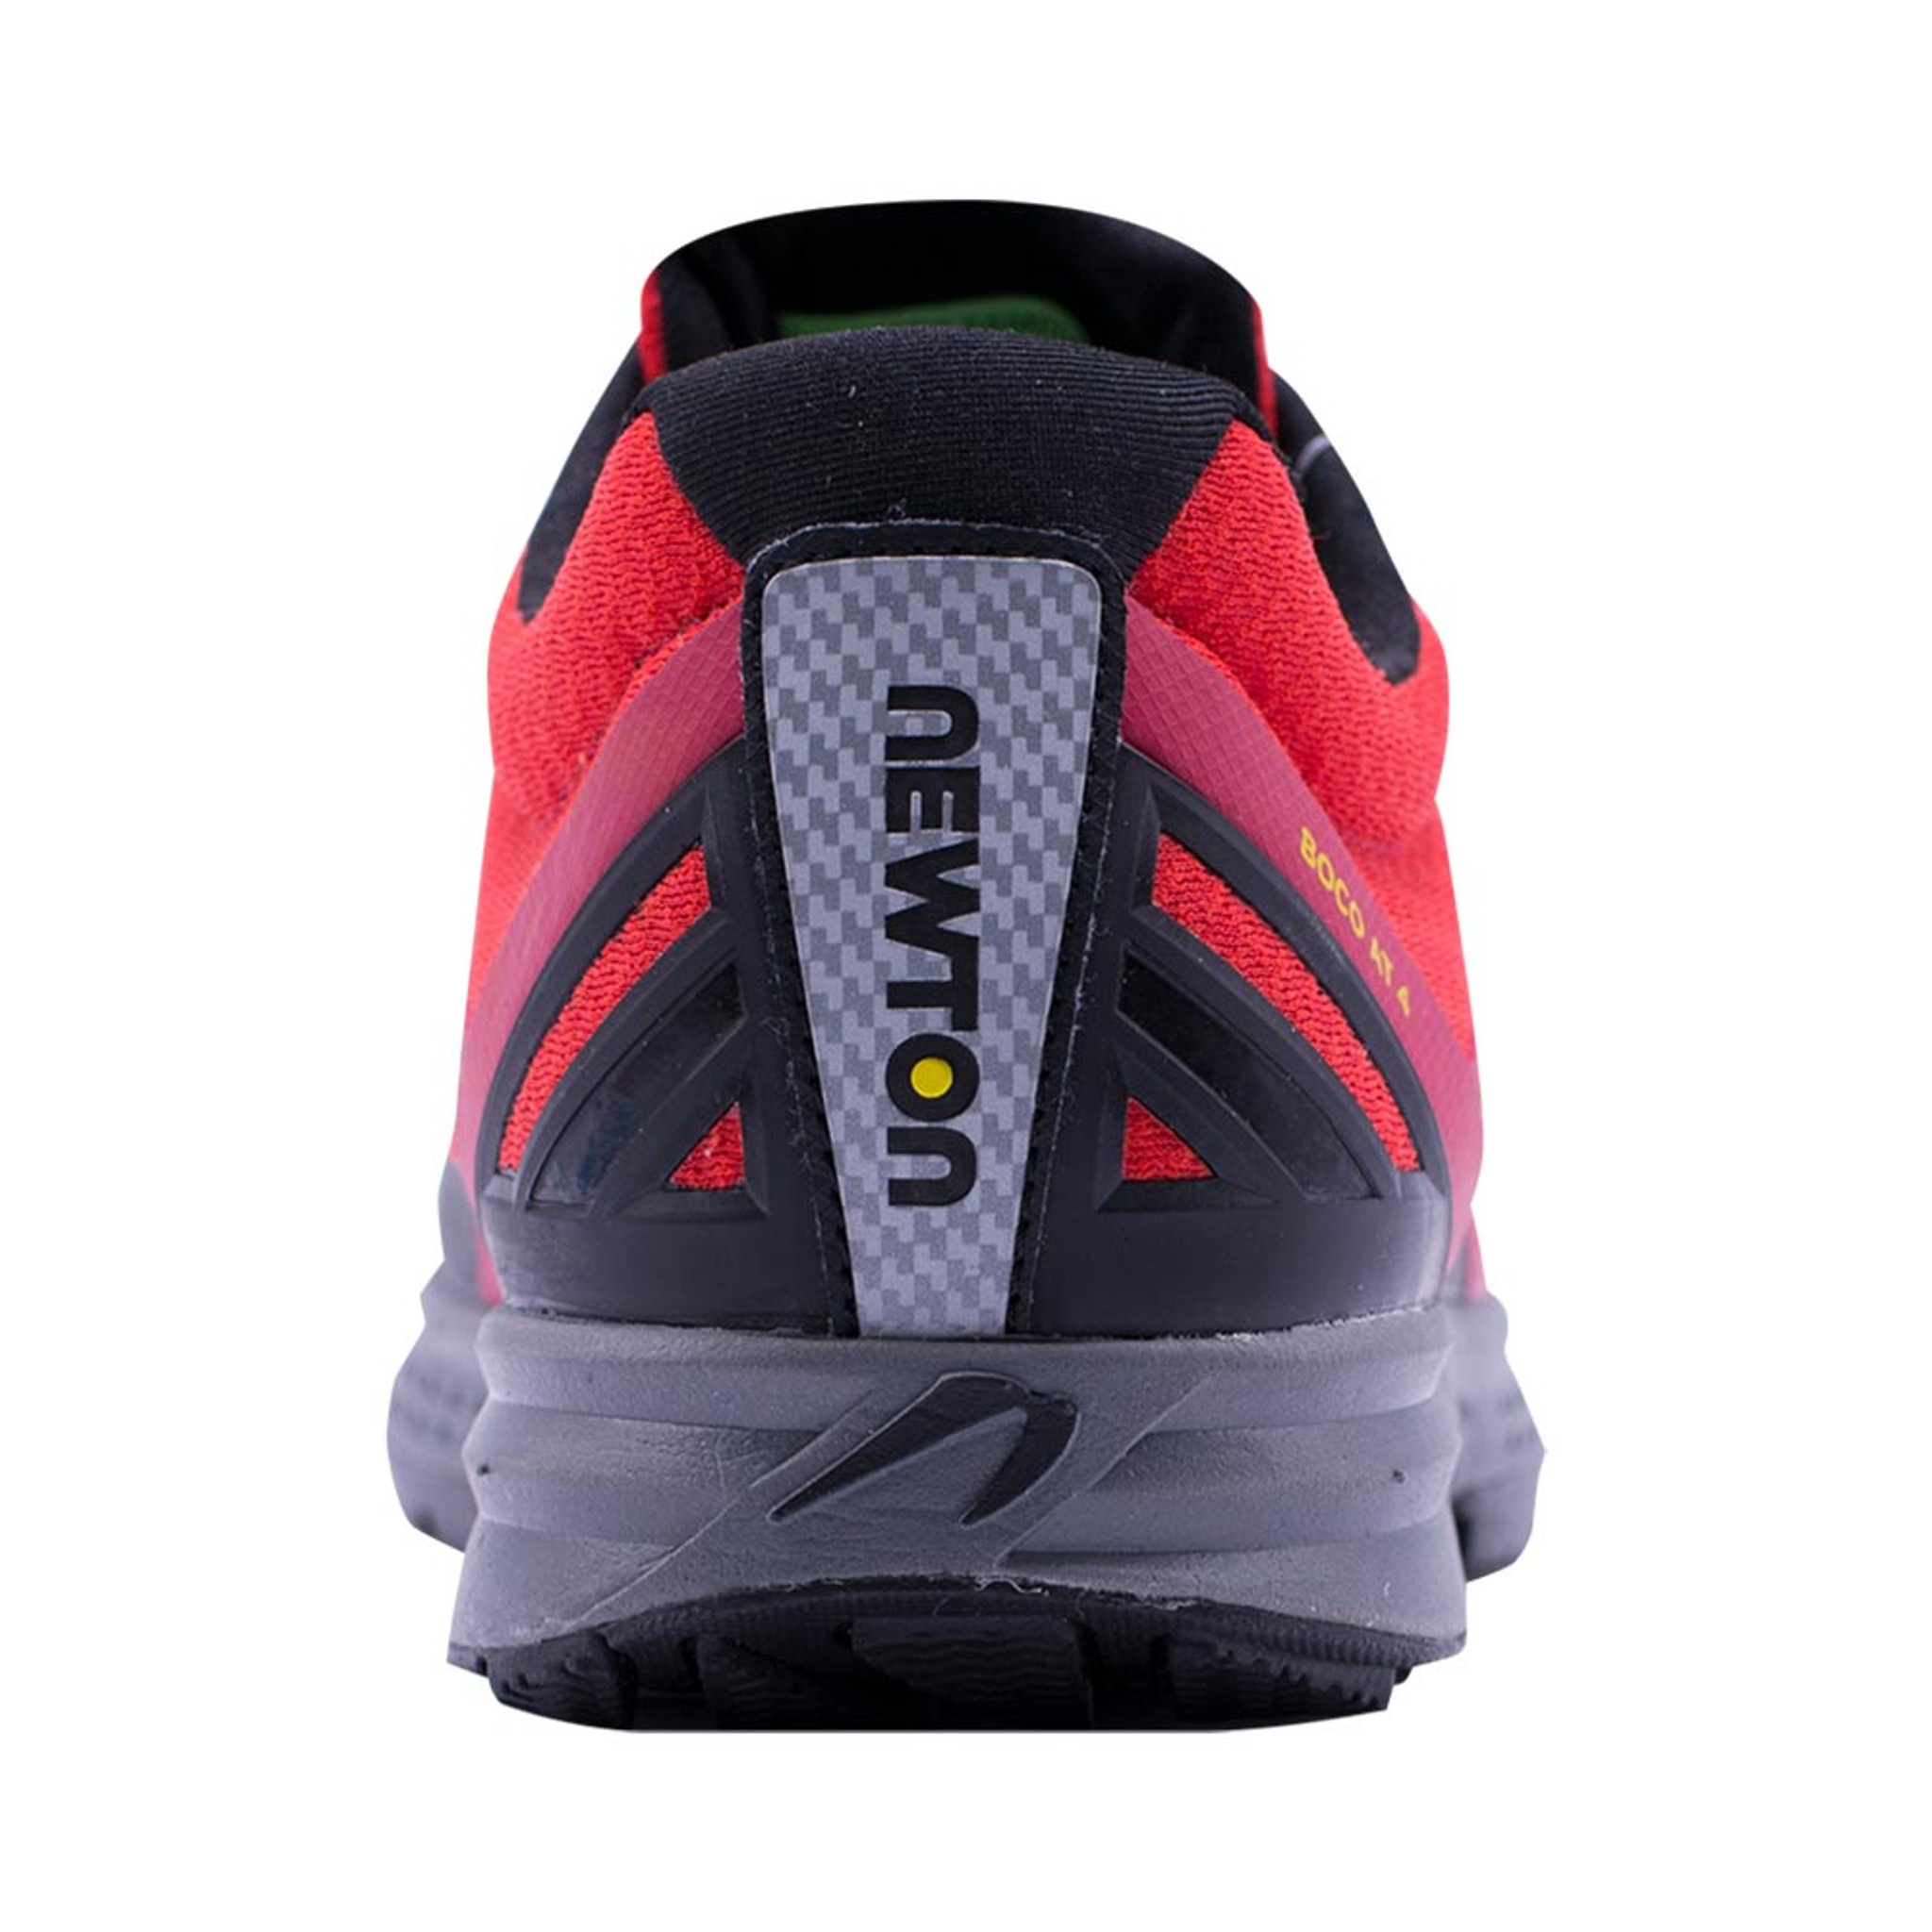 newton running shoes clearance